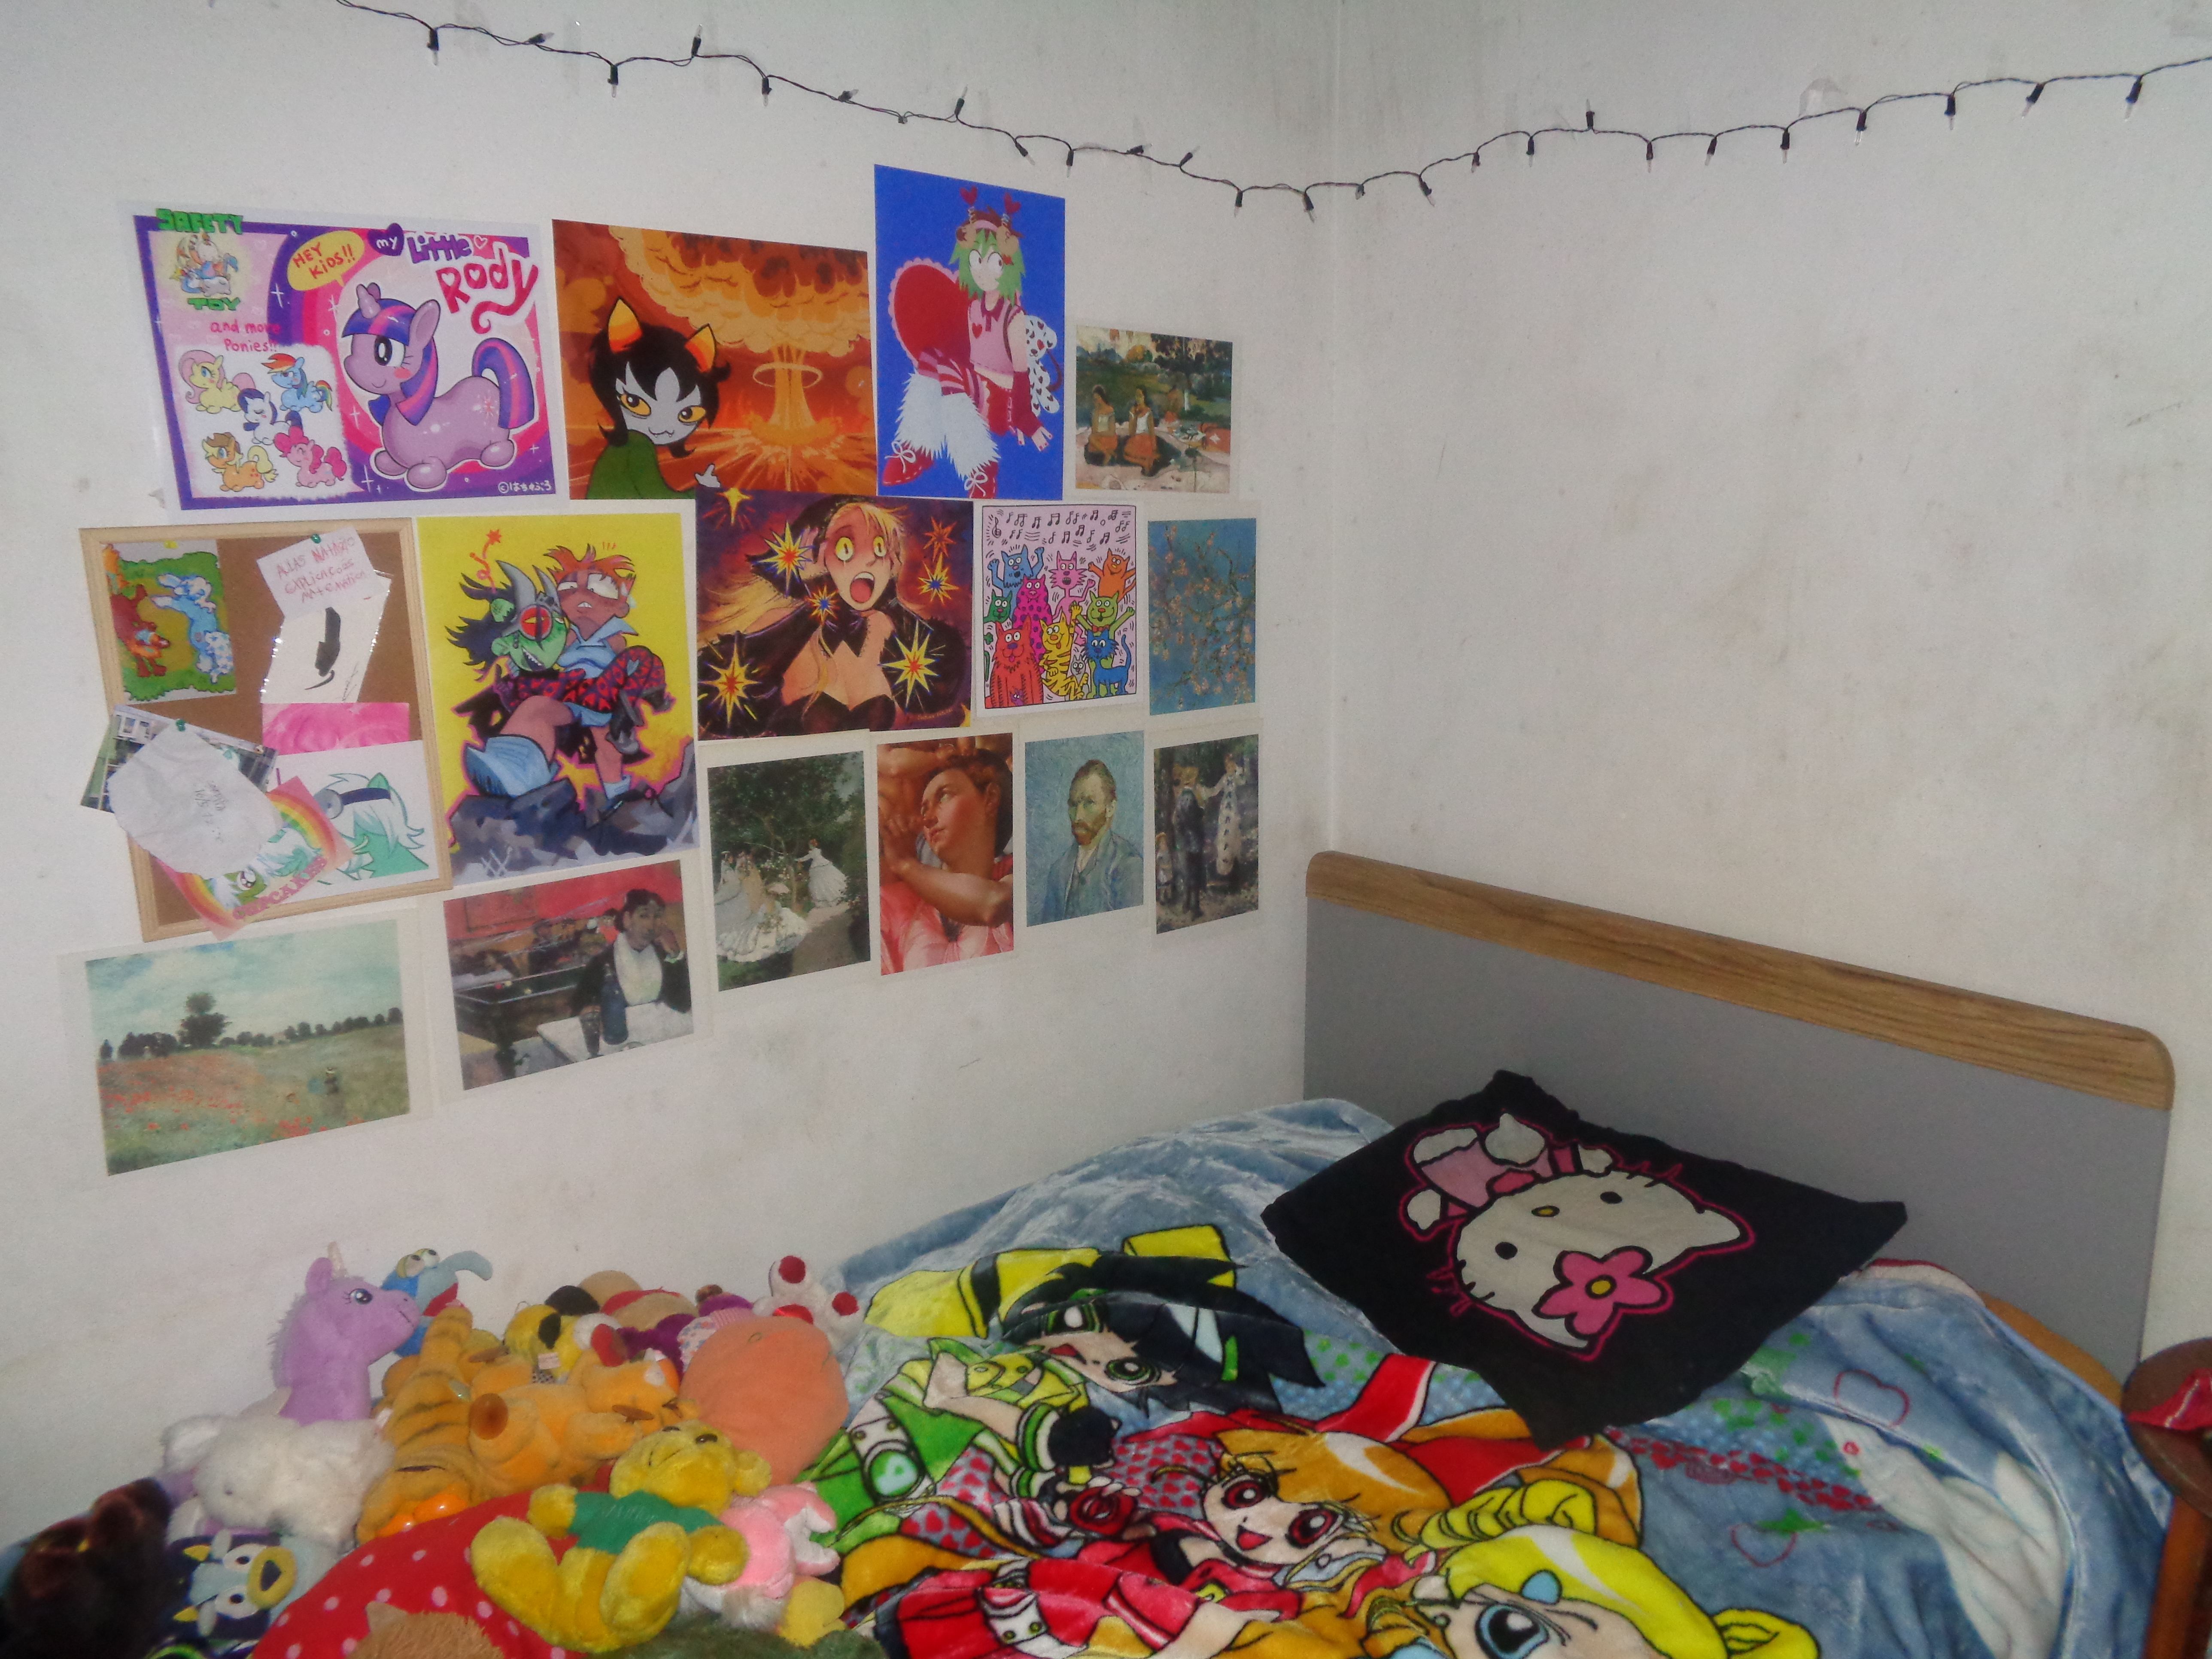 An image of the corner of a bedroom. the bed has powerpuff girls Z sheets and is covered in various plushies. above the bed are posters and prints from various artists and medias, such as homestuck, my little pony, dungeon meshi, and more. There are hung up christmas lights above it all.